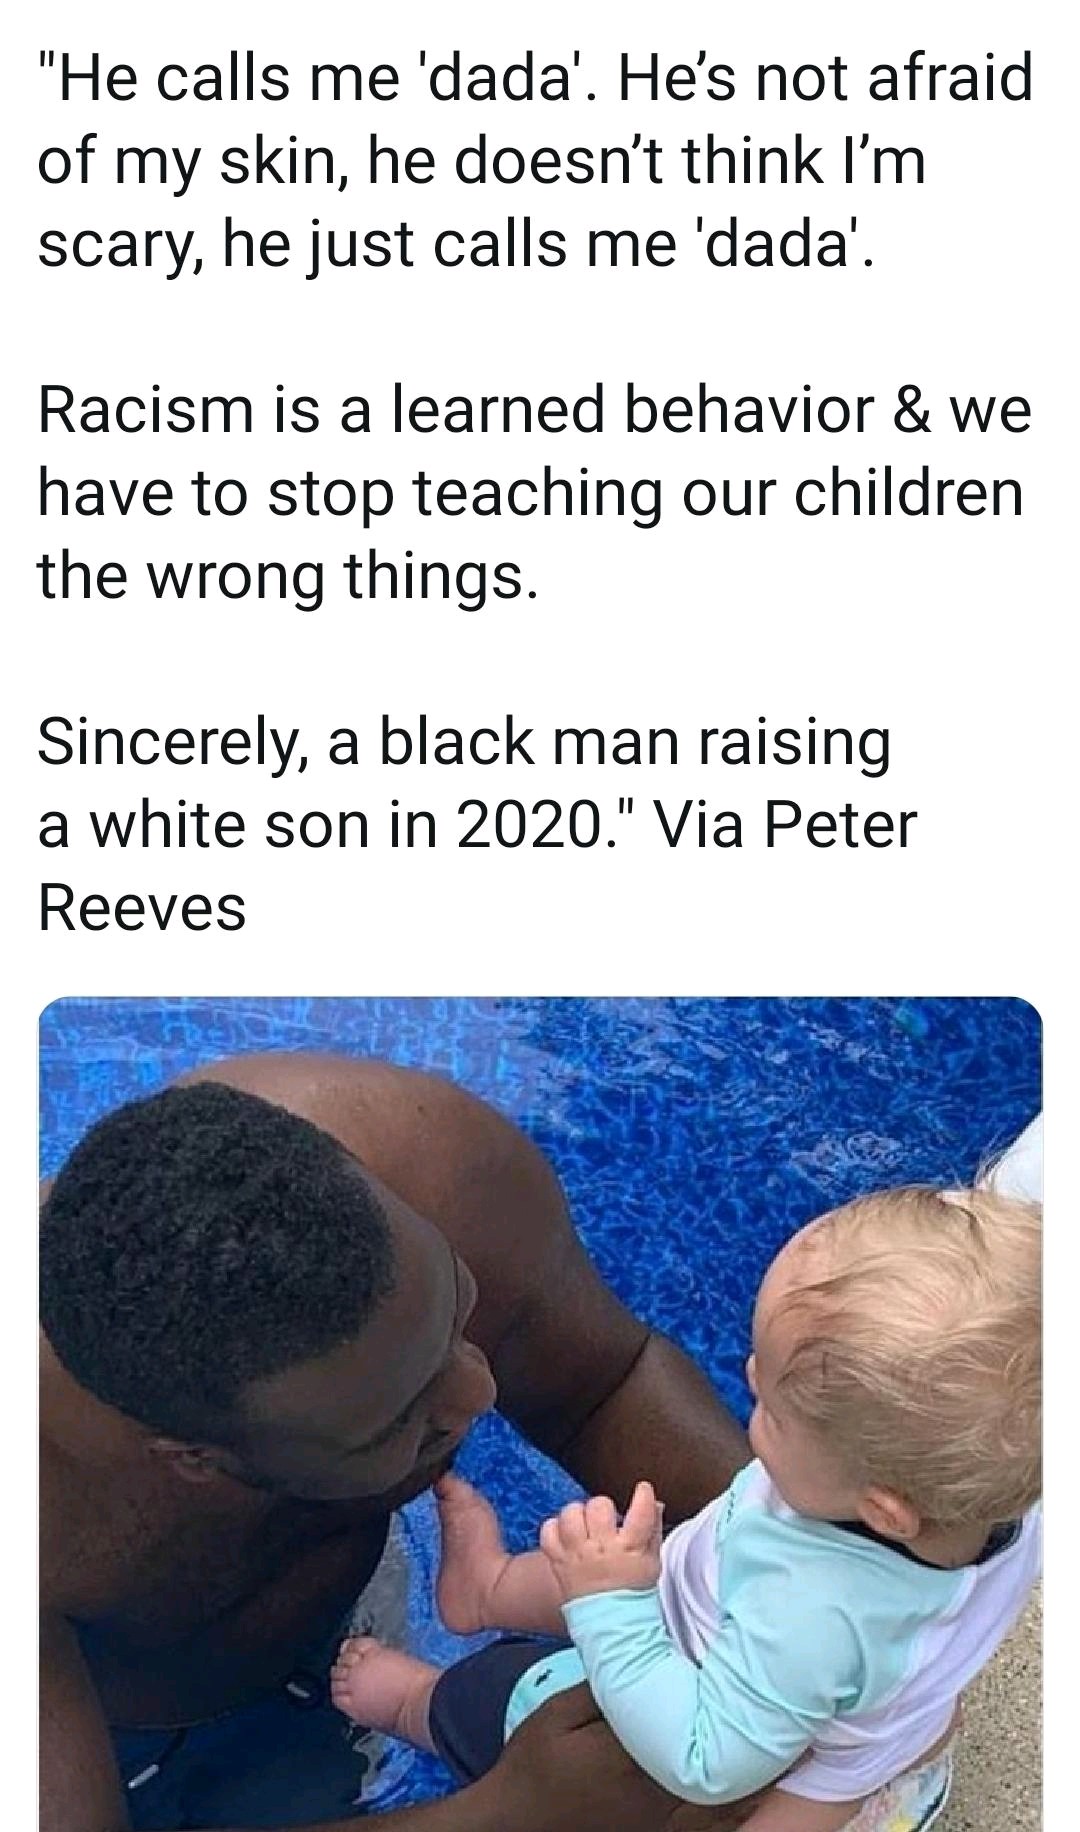 PSA: Racism is learned, but you already knew that.